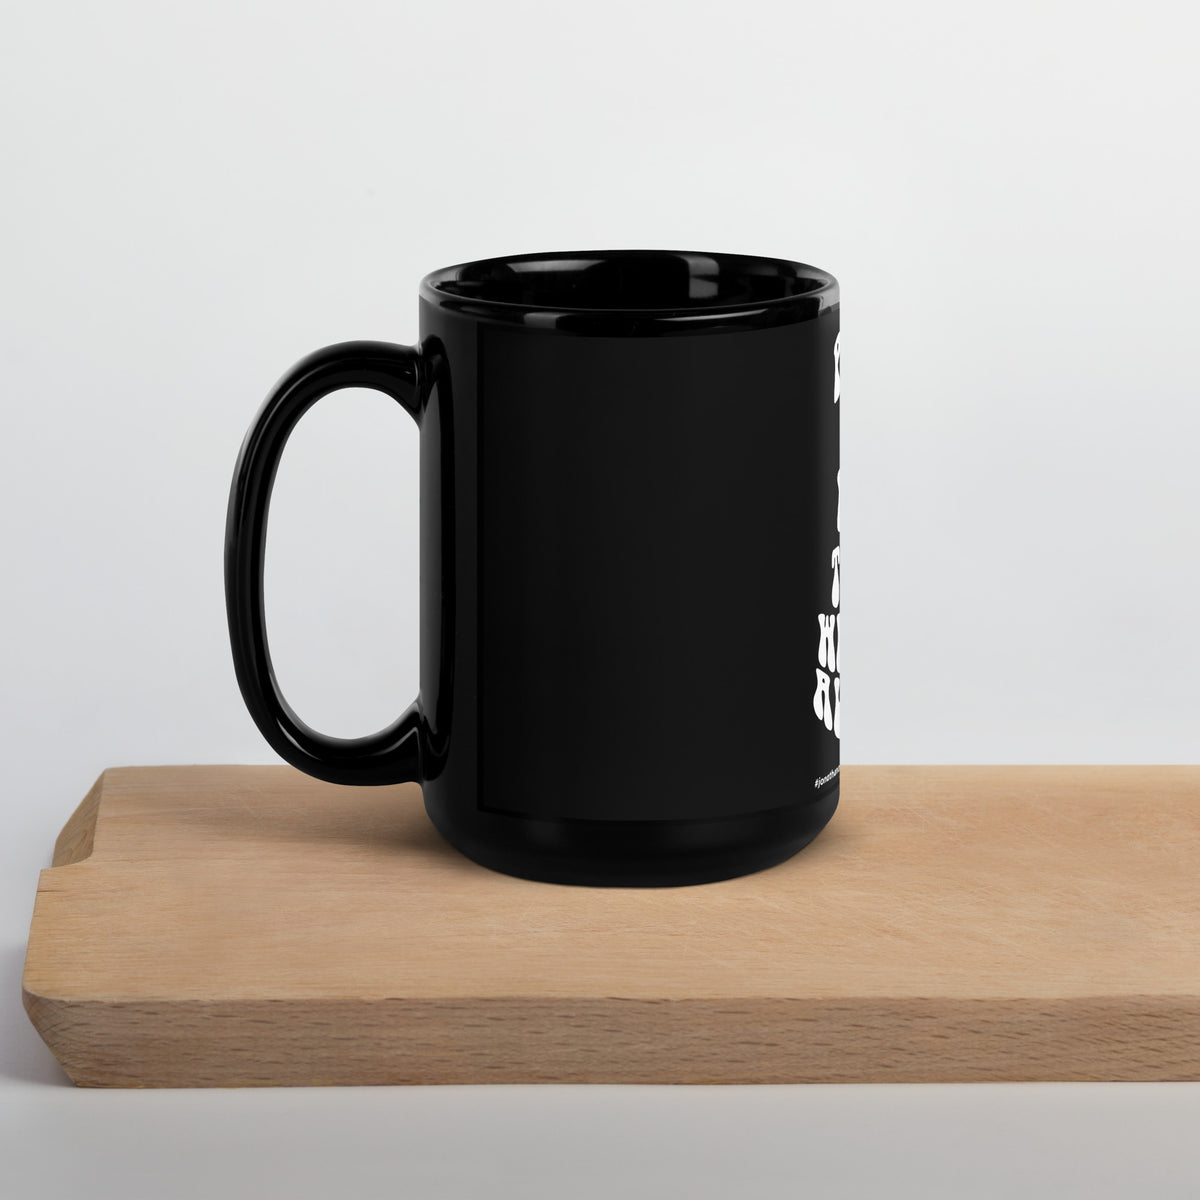 Peace And Love, That's What We All Need Upstormed Black Glossy Mug